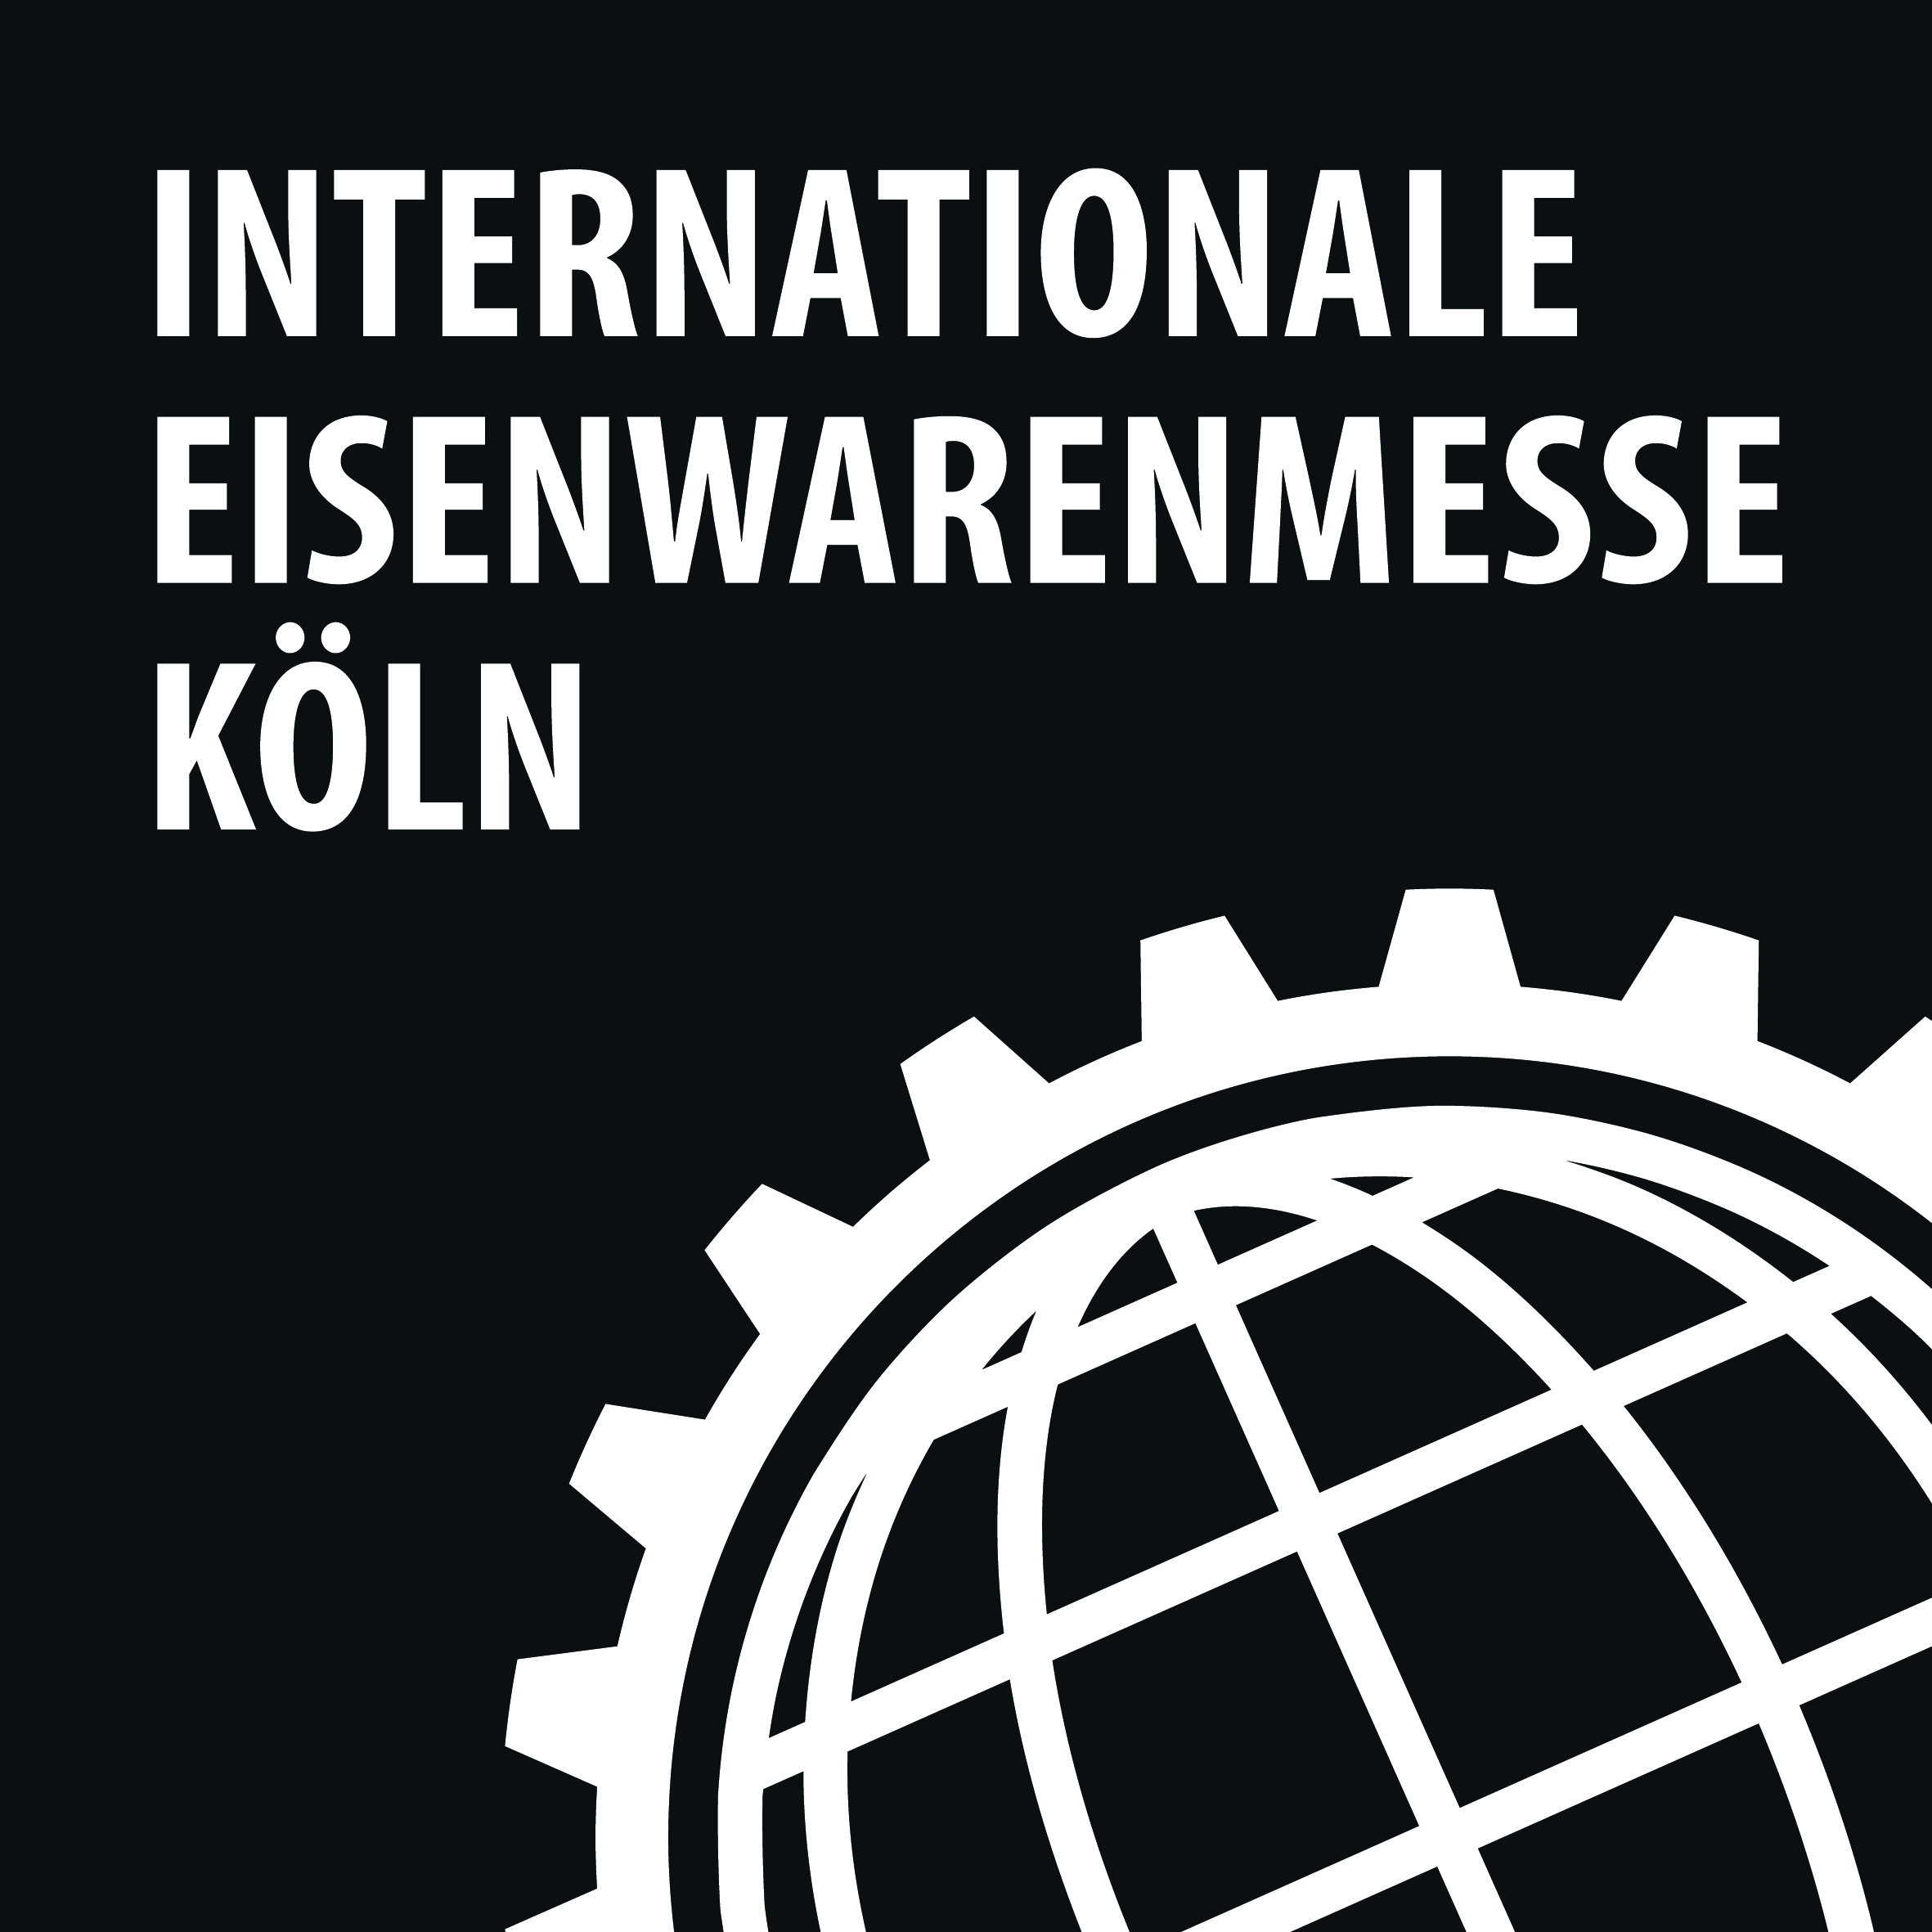 Successful relaunch for the EISENWARENMESSE – INTERNATIONAL HARDWARE FAIR in Cologne